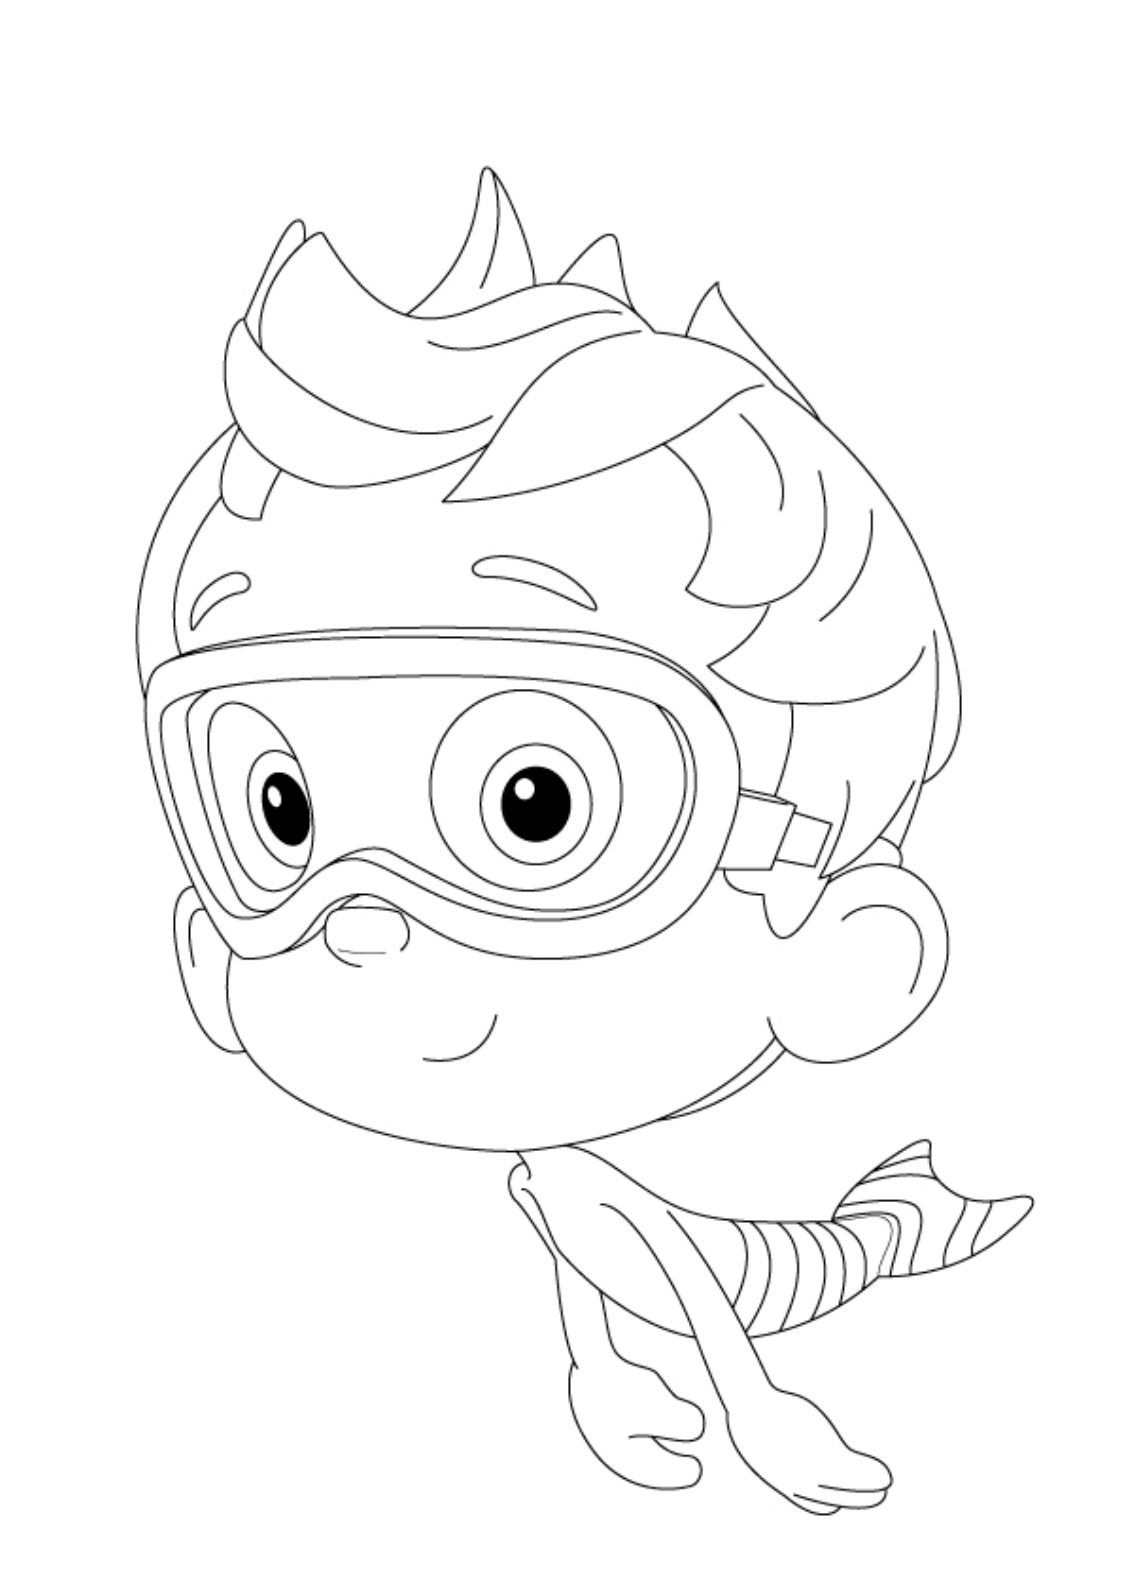 Printable Bubble Guppies Coloring Pages Bubble Guppies Coloring Pages Nonny Cartoon Coloring Pages Of